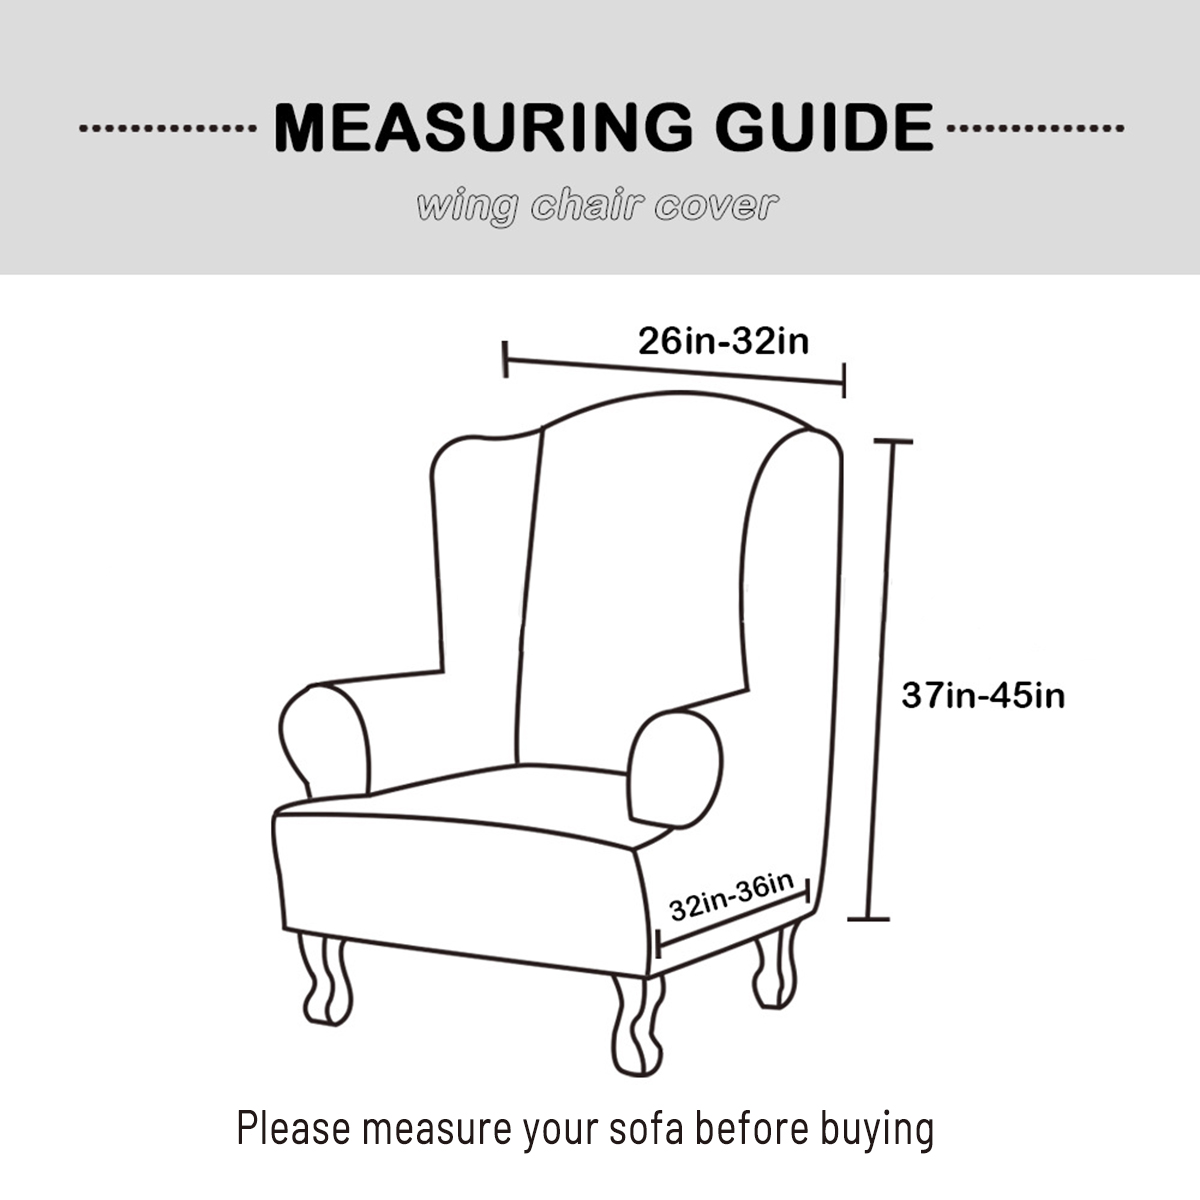 Waterproof Dust-proof Velvet Sofa Chair Cover Stretch Wing Chair Cover Wingback Armchair Protector Cover Furniture Cover Stretch